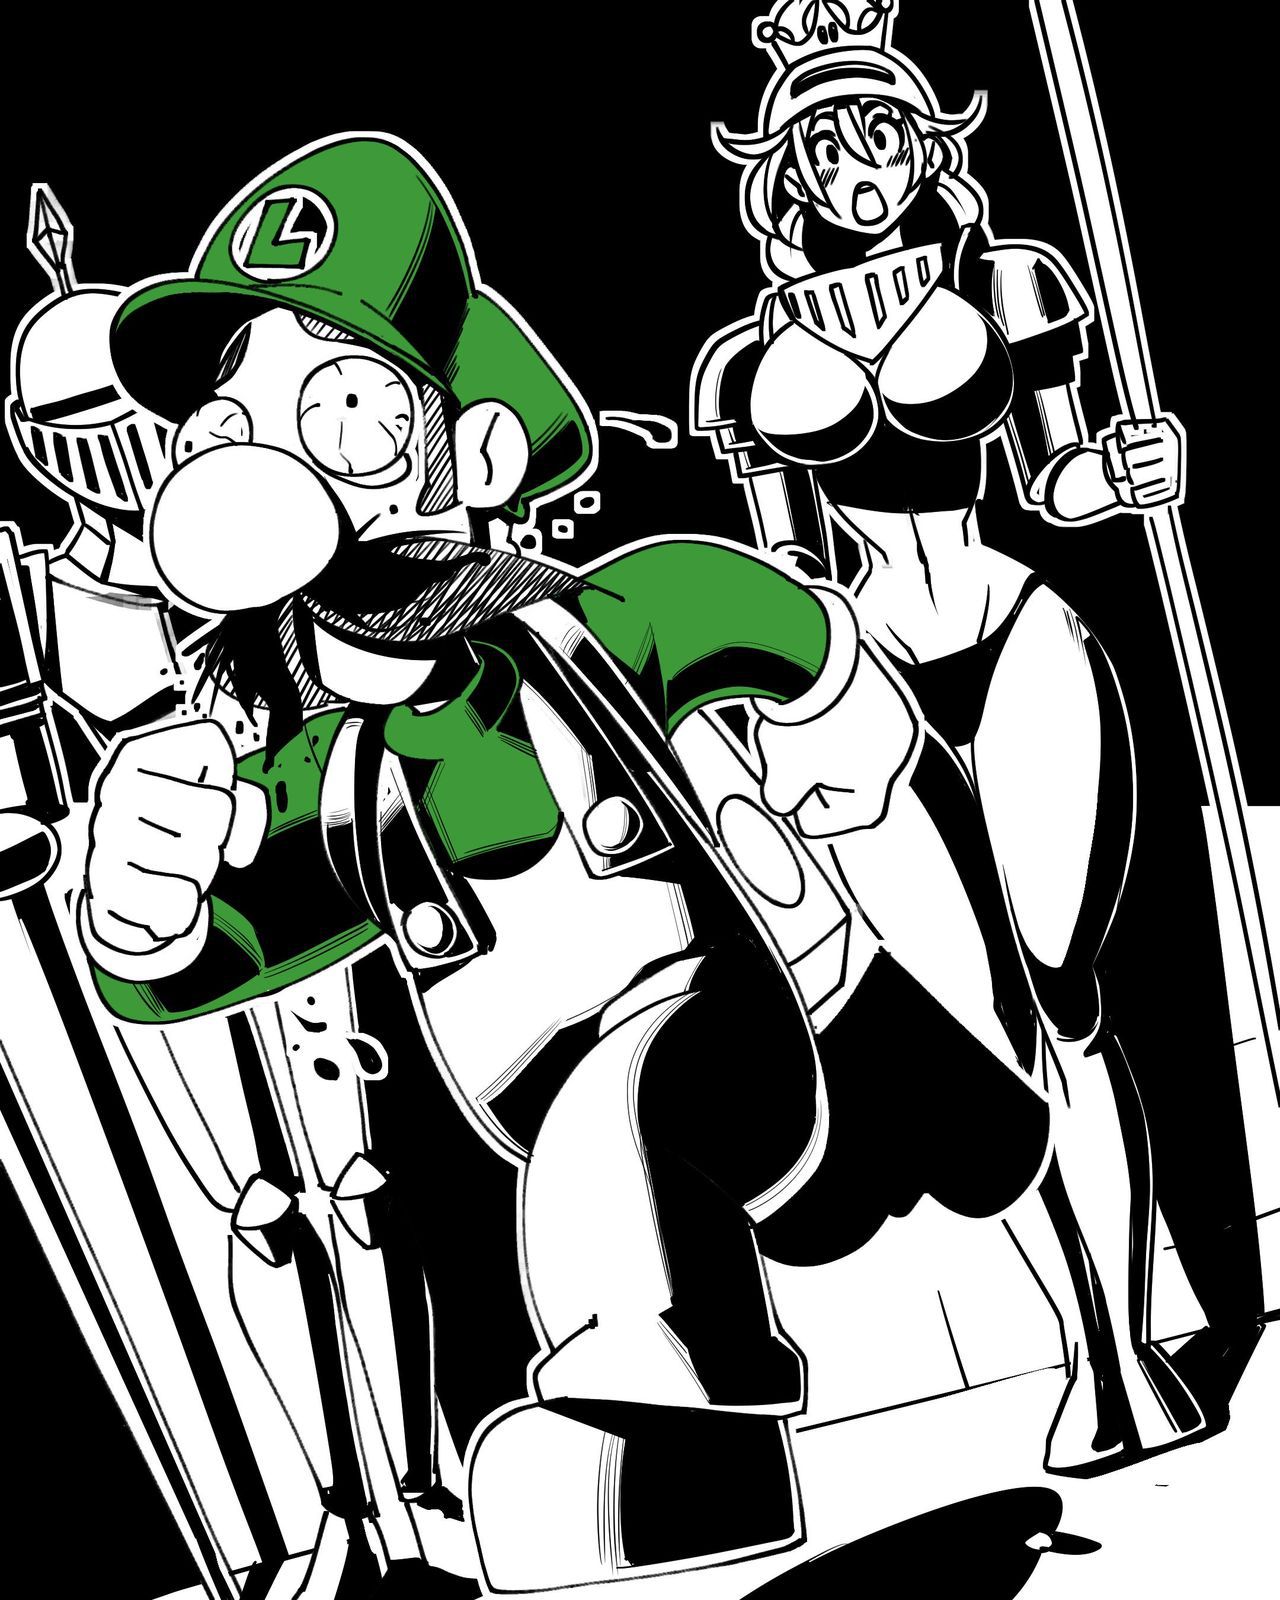 [Nisego] Inktober 2019 (Super Mario Brothers) [Ongoing] 62